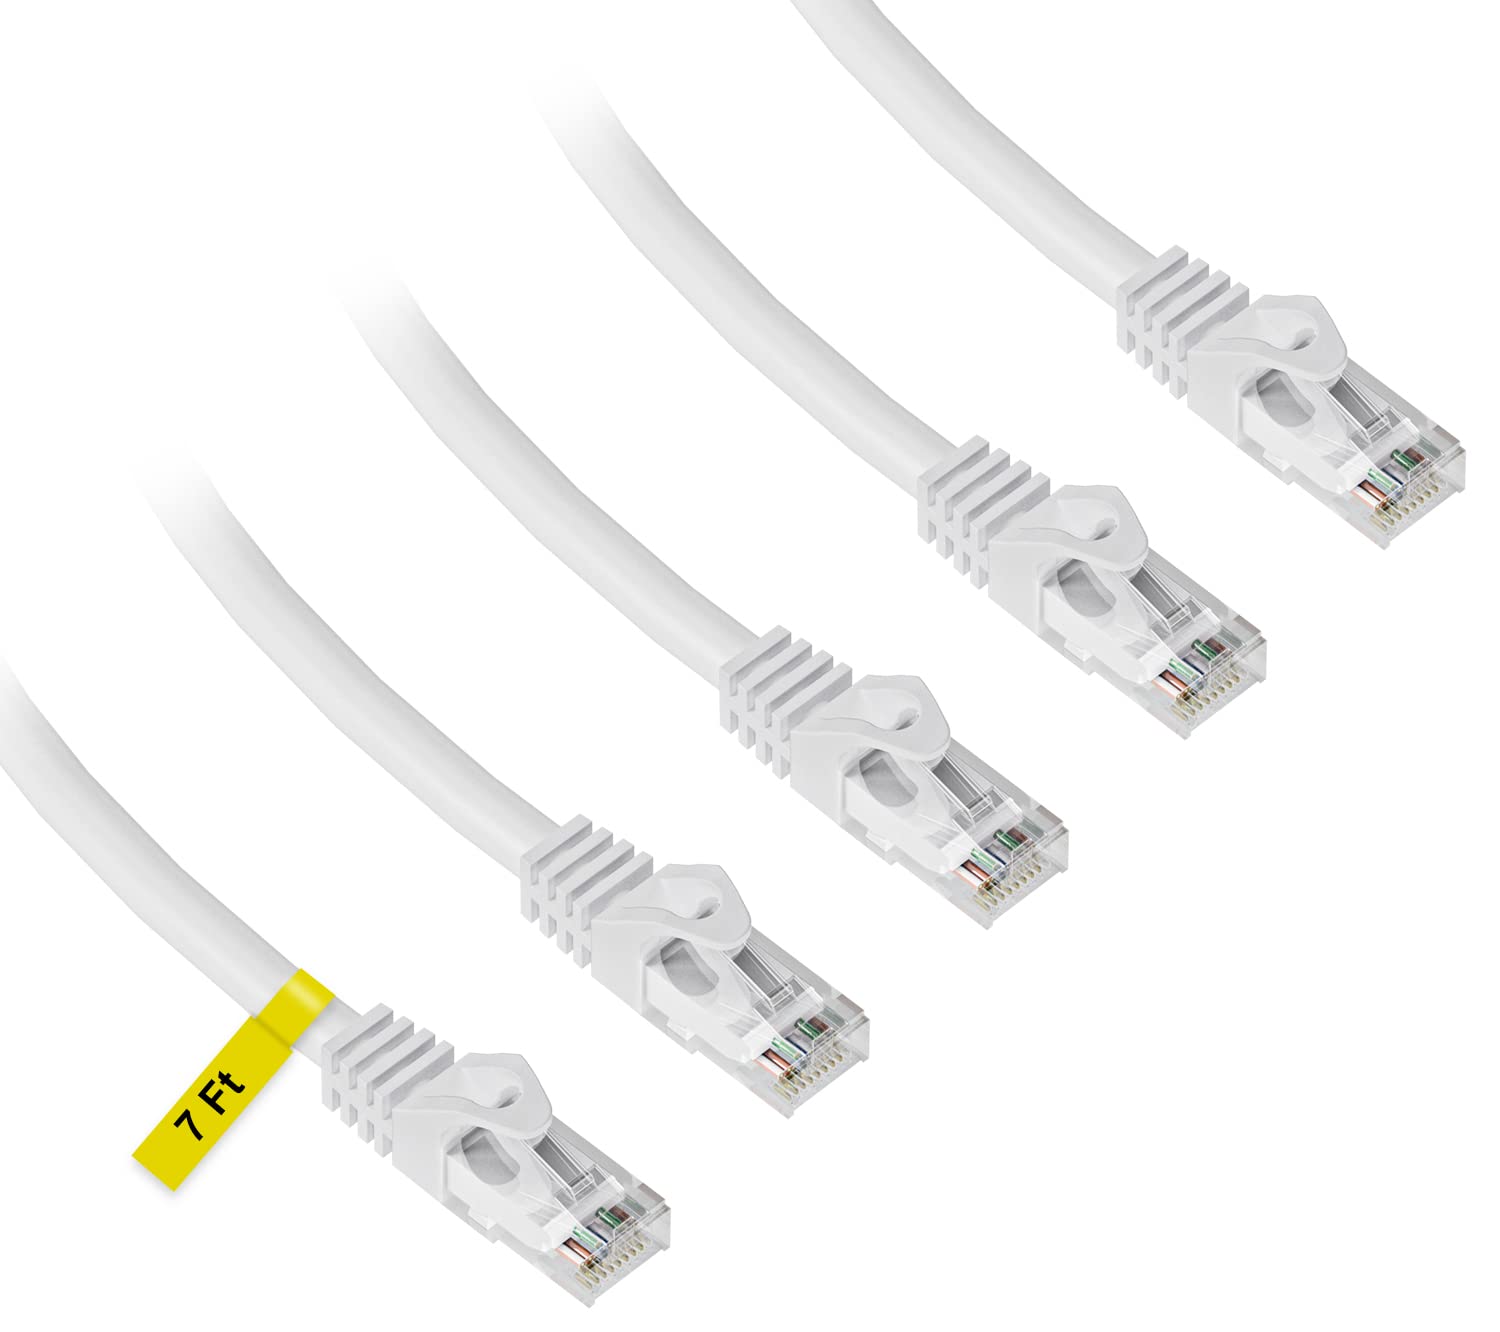 iwillink Cat6 Ethernet Cable 7 ft (5 Pack),Support POE [...]